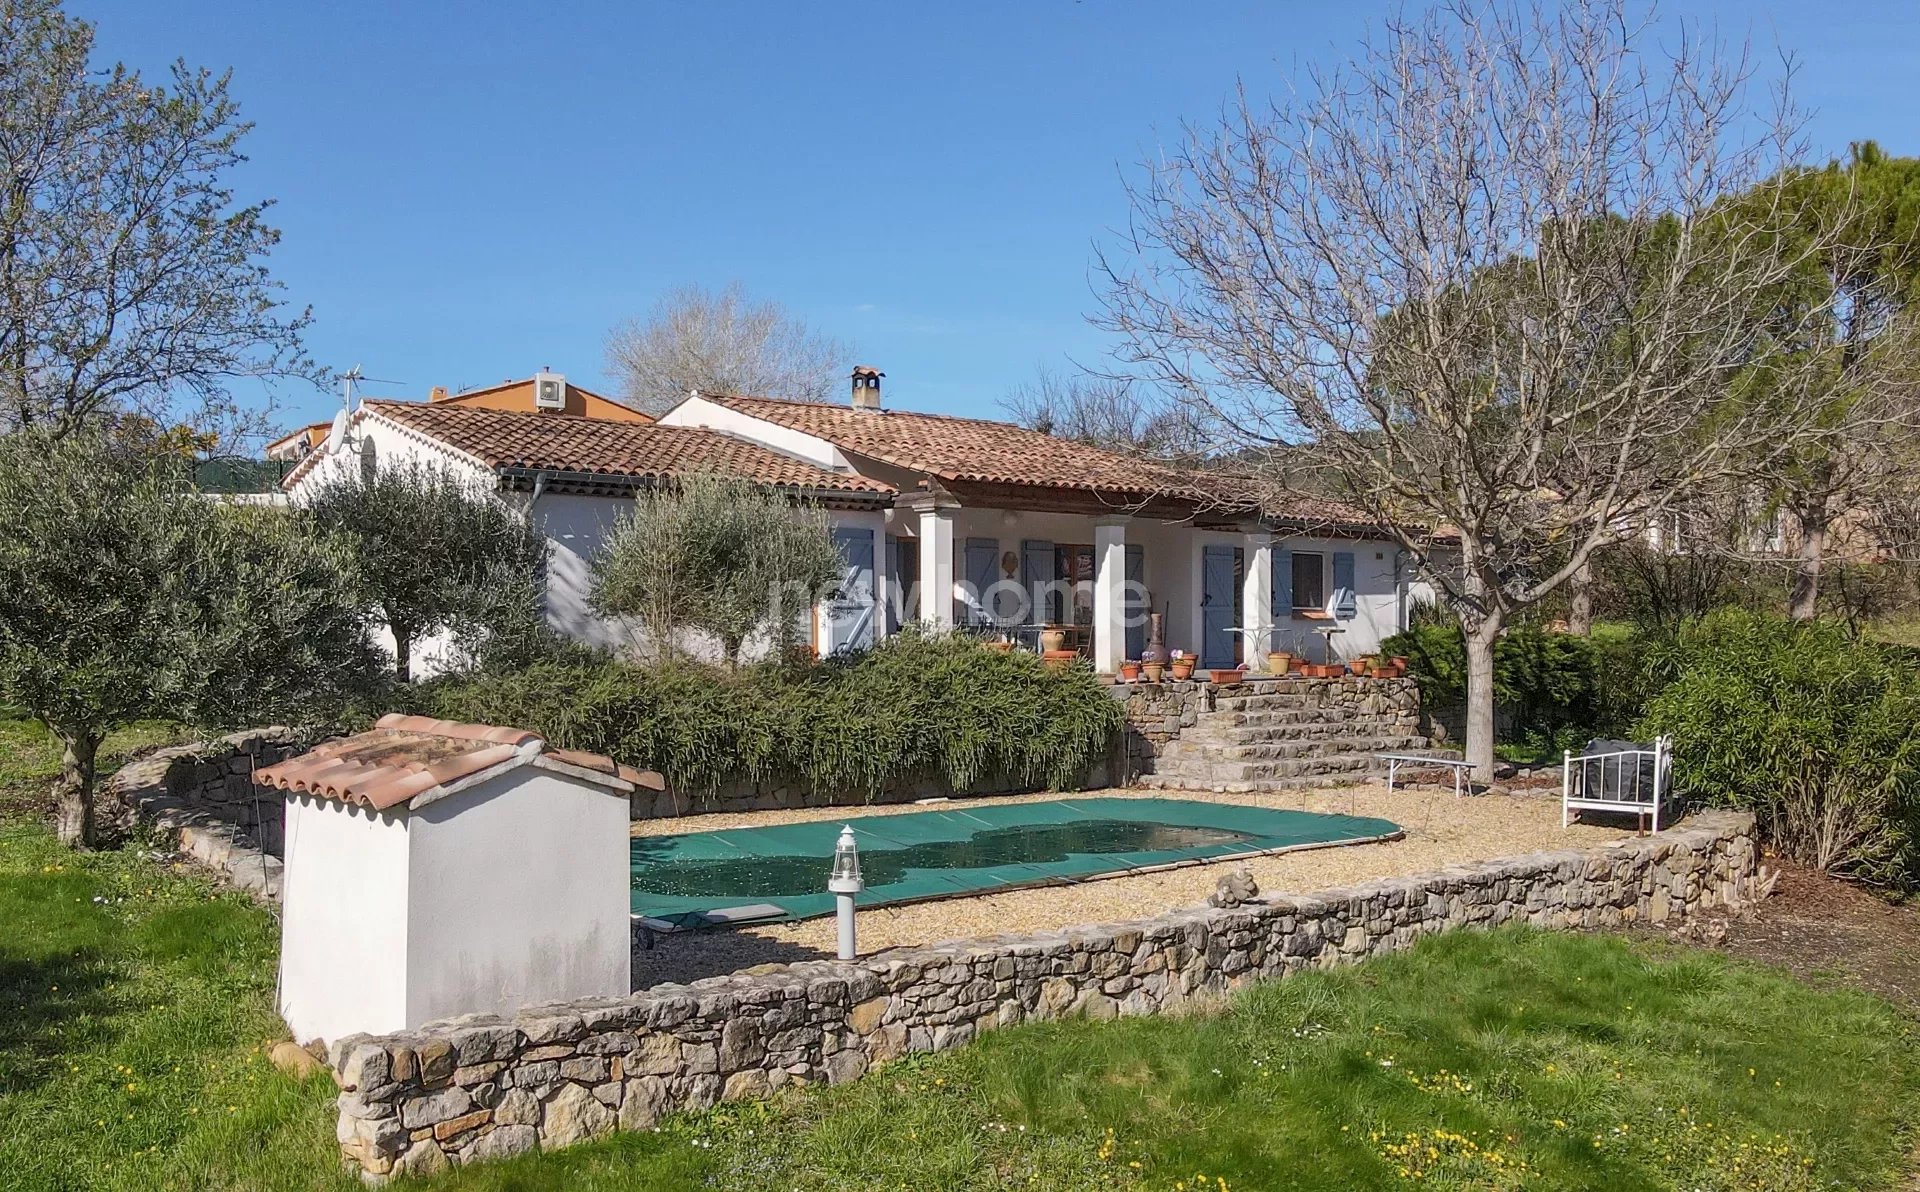 Ideal villa with pool, peacefully situated with beautiful views.